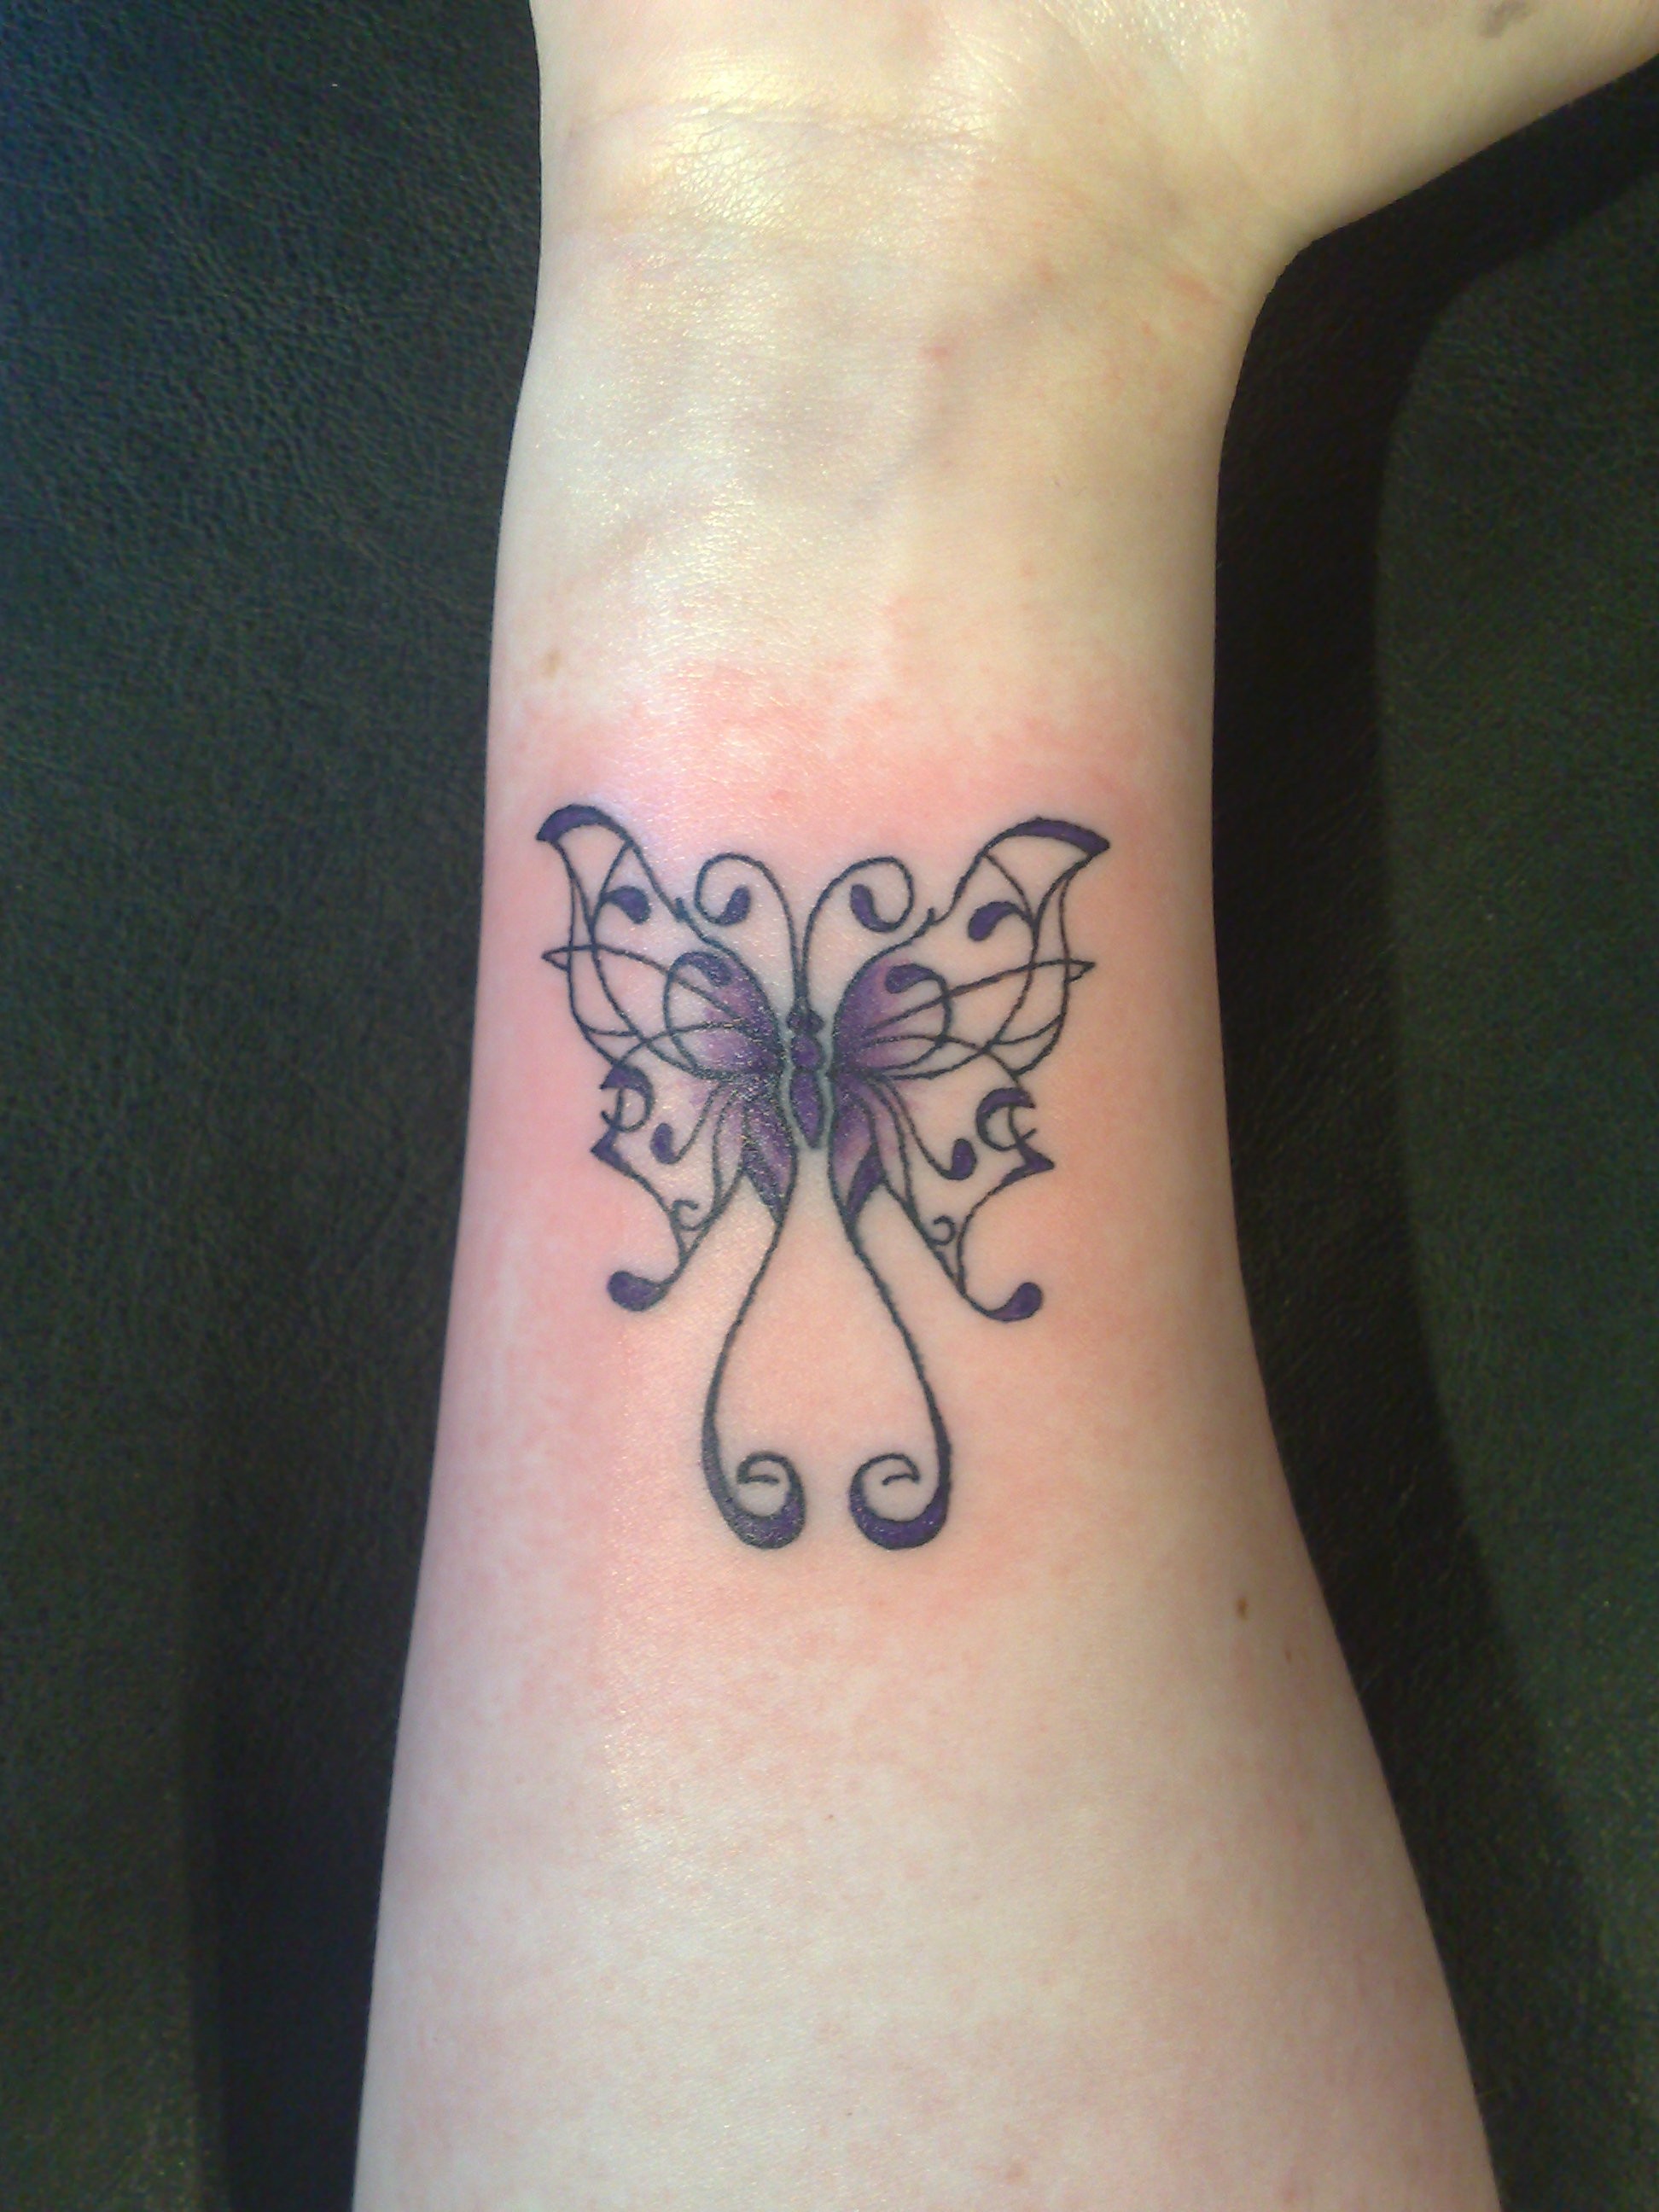 A Butterfly Tattoo on Wrist Gallary| Meaning| Tumblr